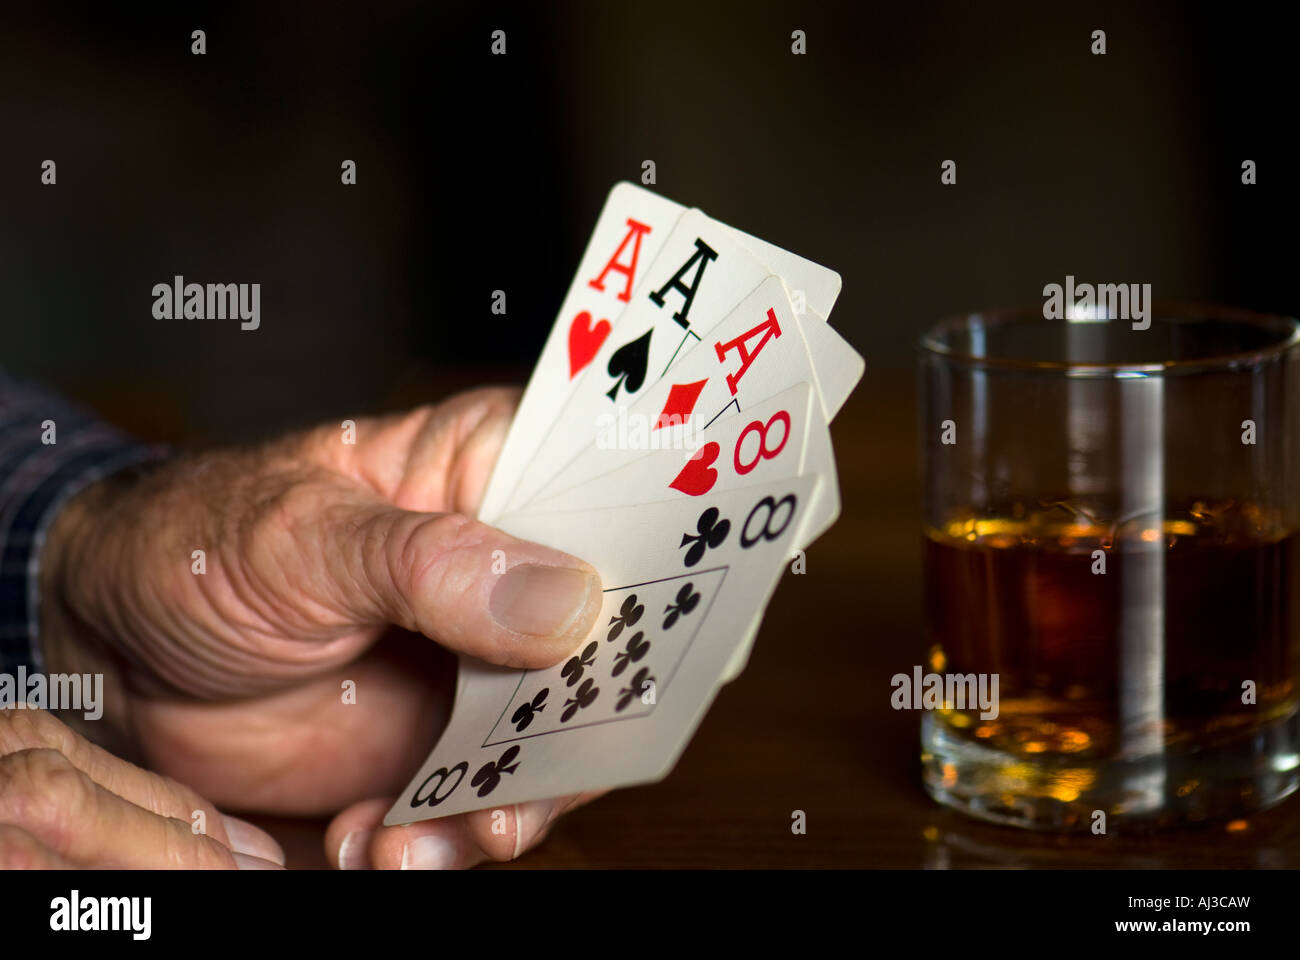 Caucasian man’s hand holding a poker hand of playing cards.  USA. Stock Photo